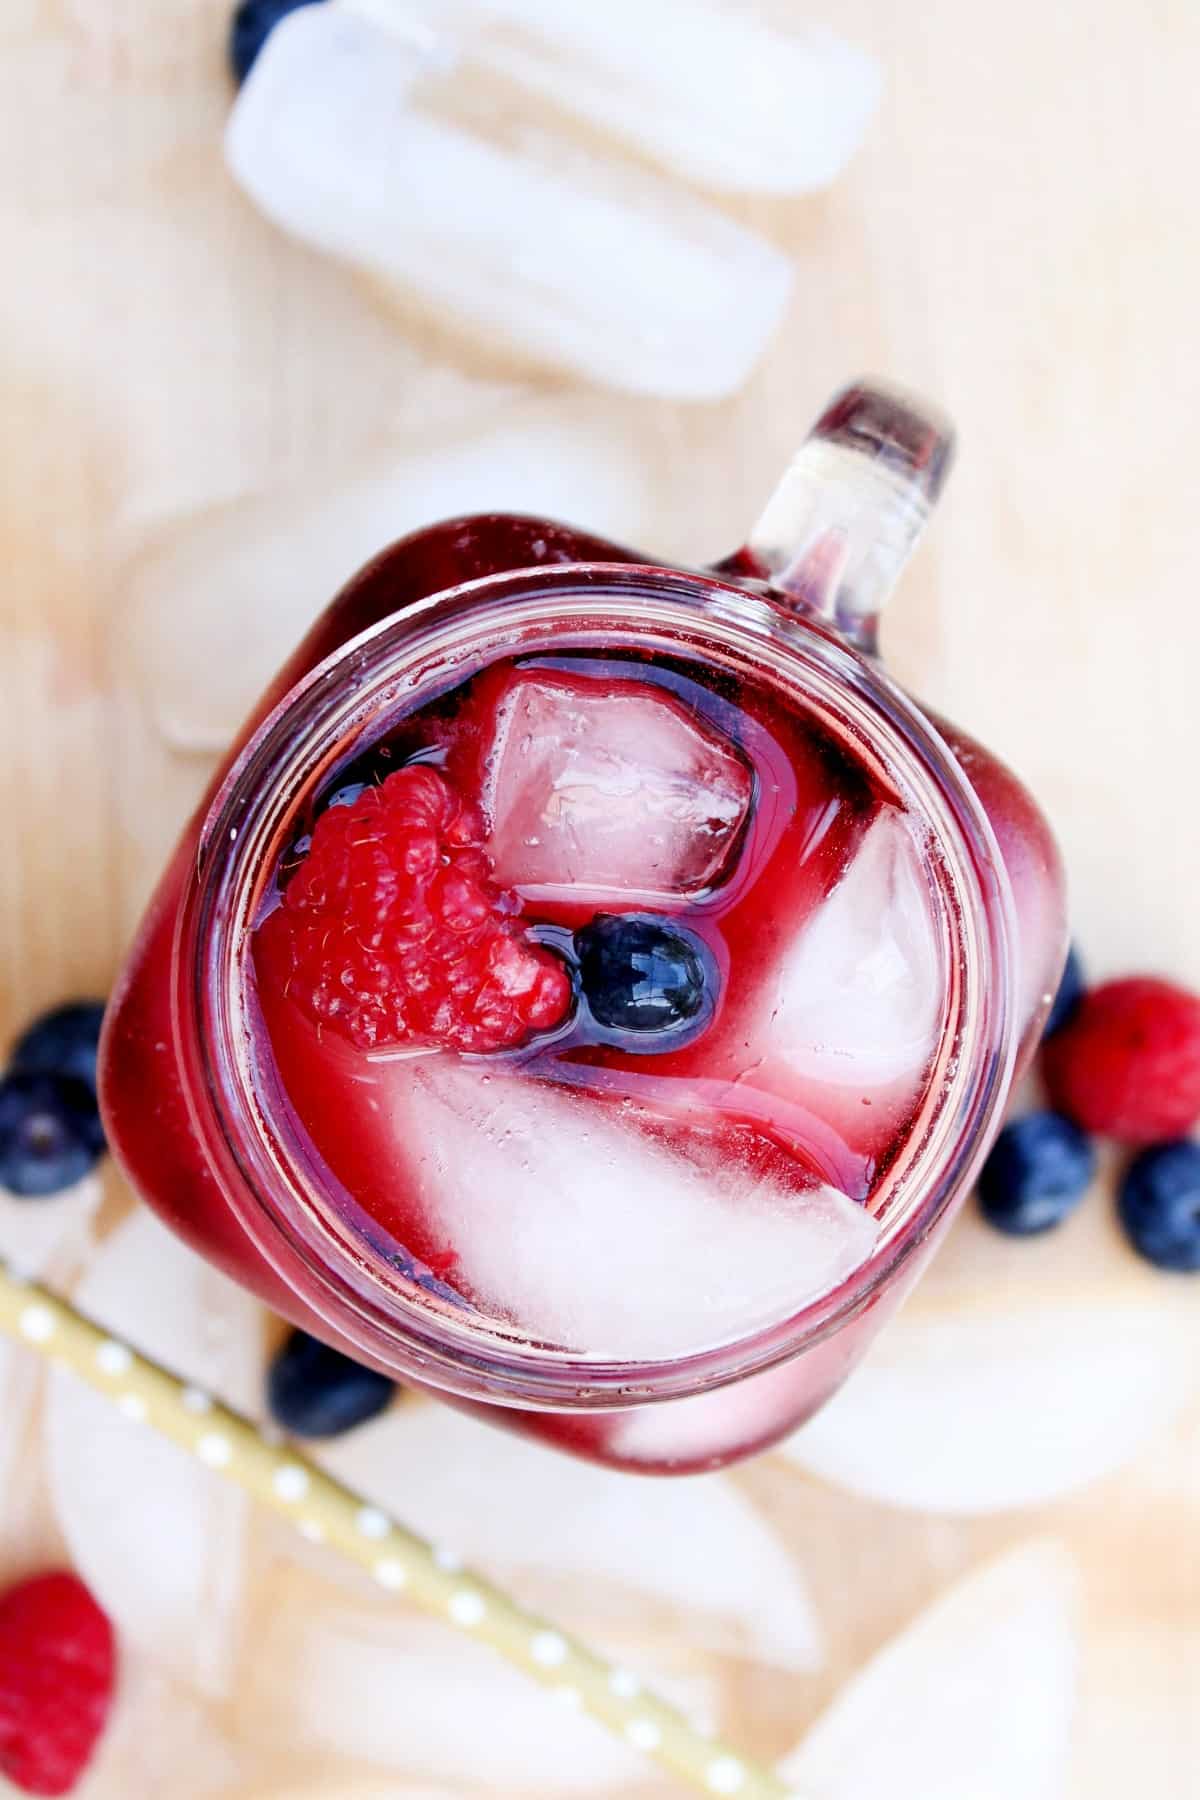 Overhead view looking down into a glass mug with red wine and berries over ice. Ice cubes are around the glass too.